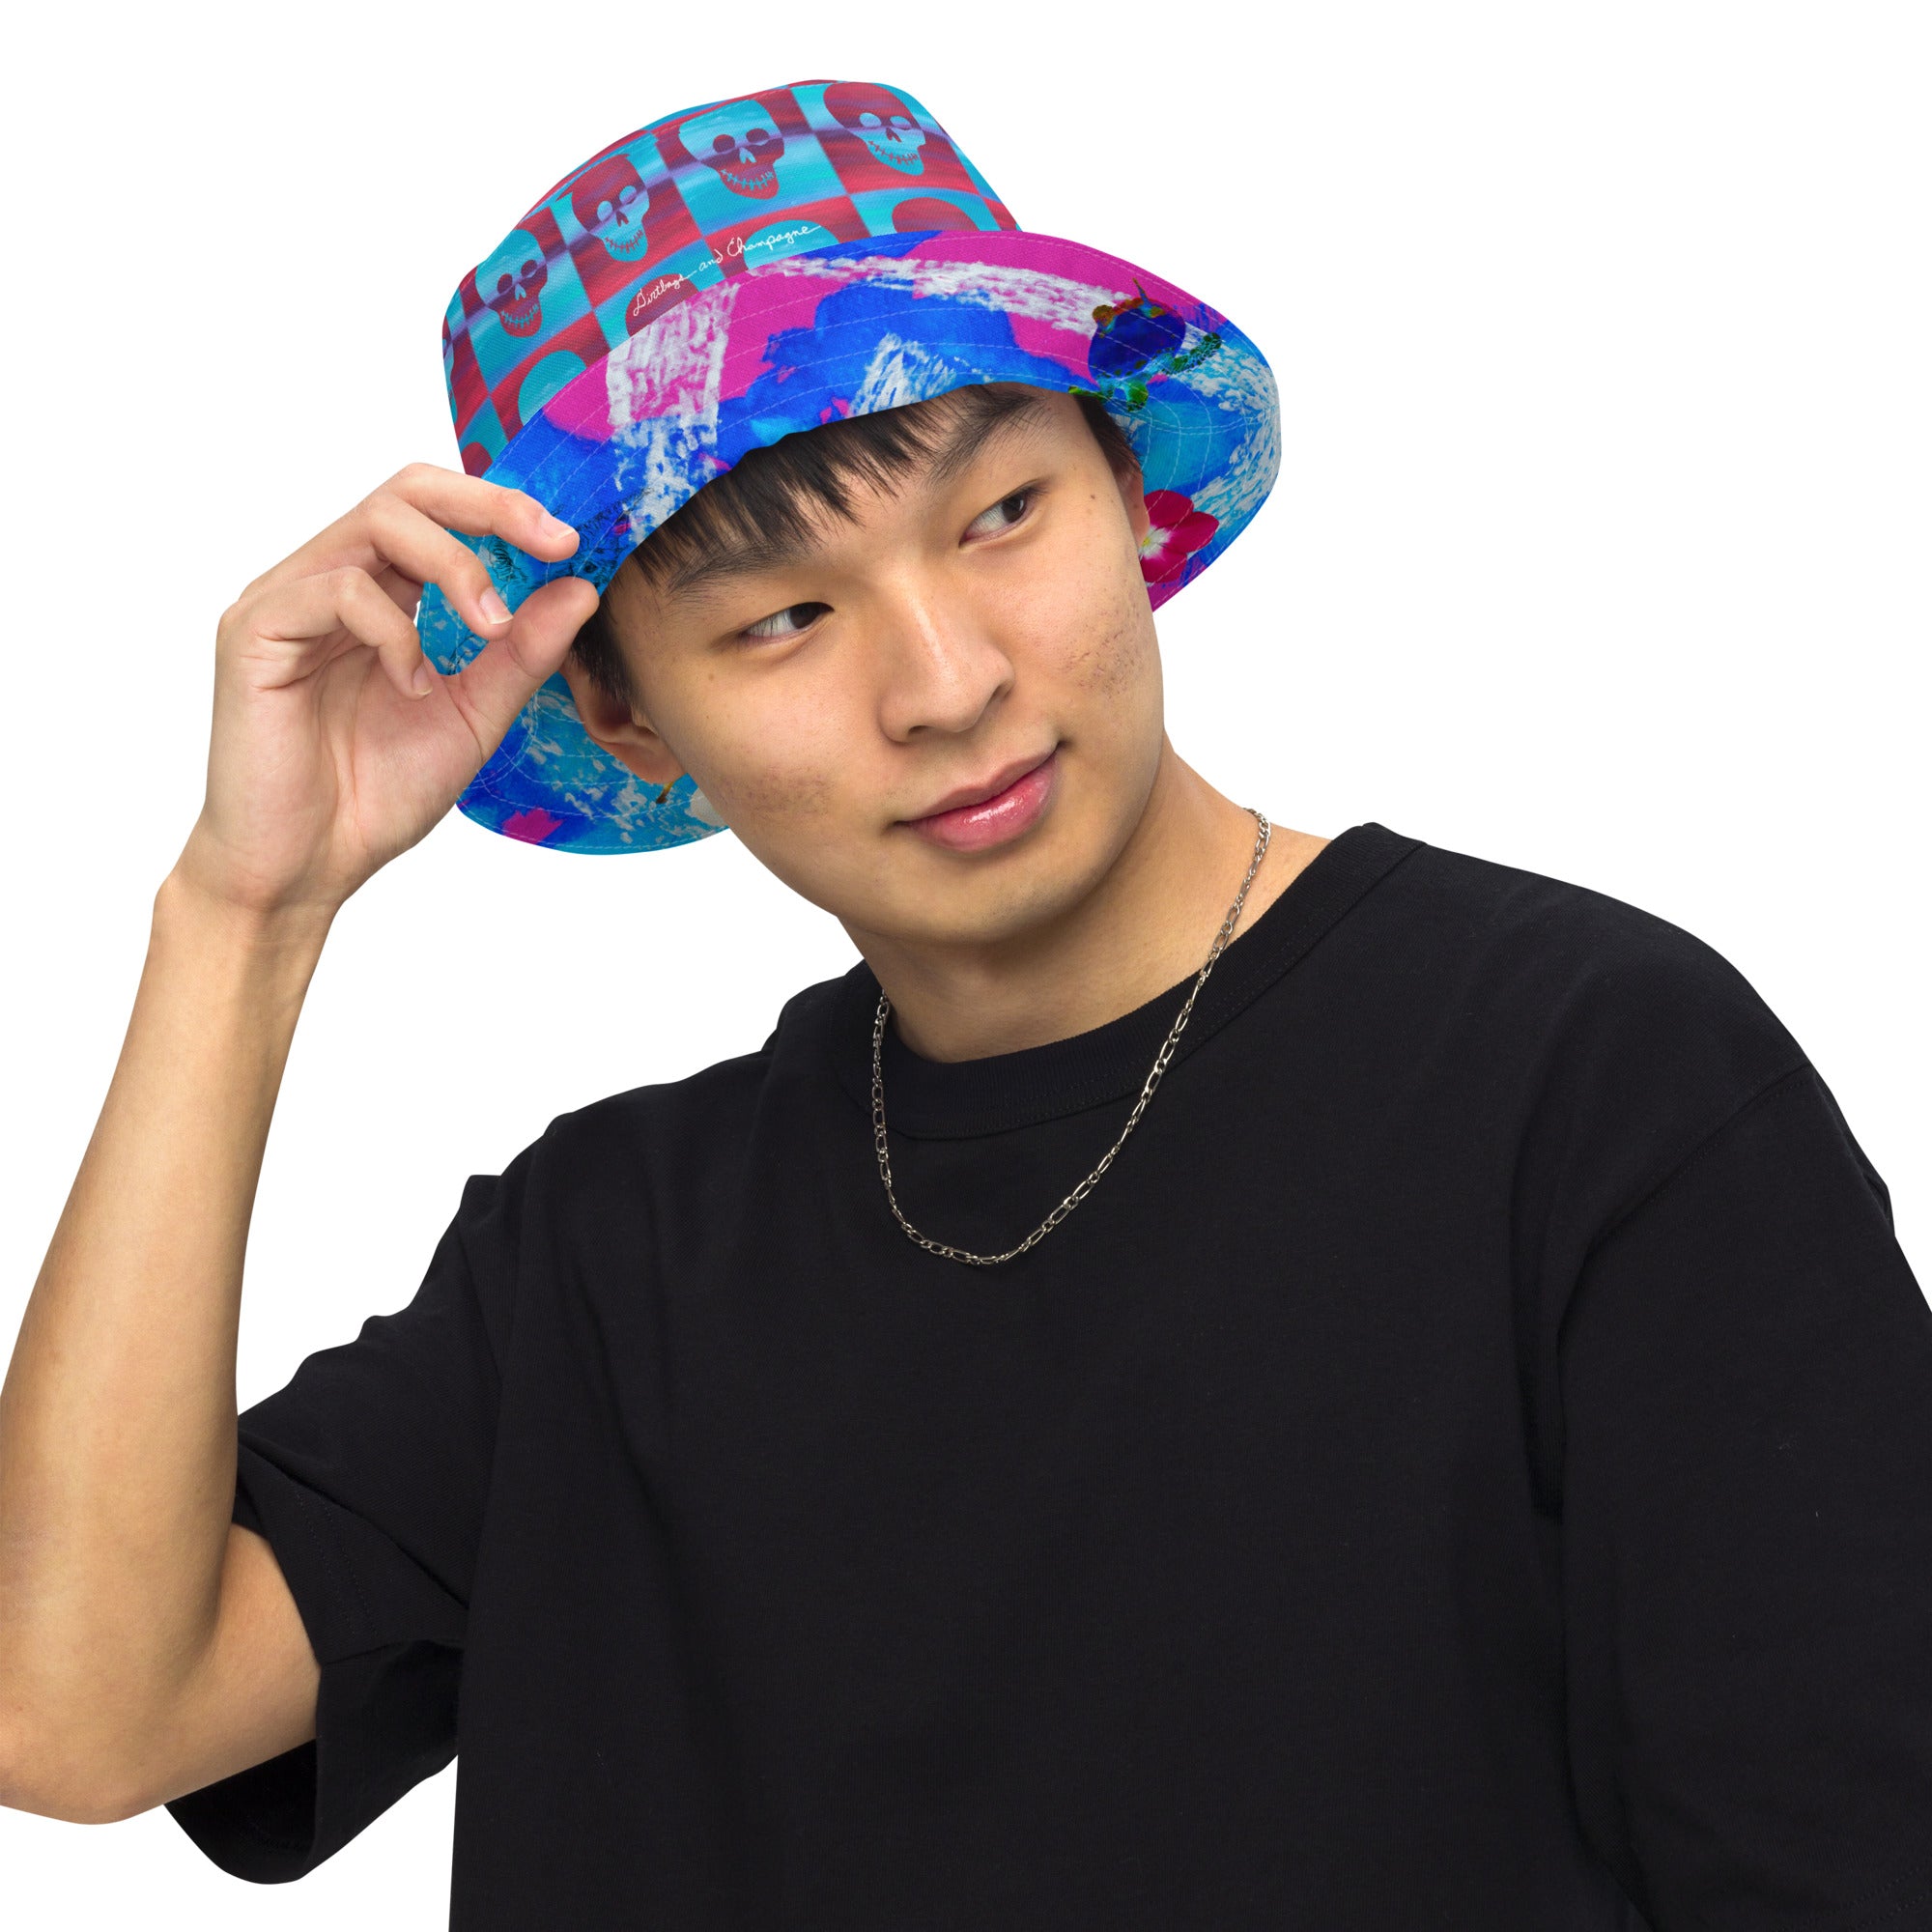 There's a lot going on here Reversible bucket hat